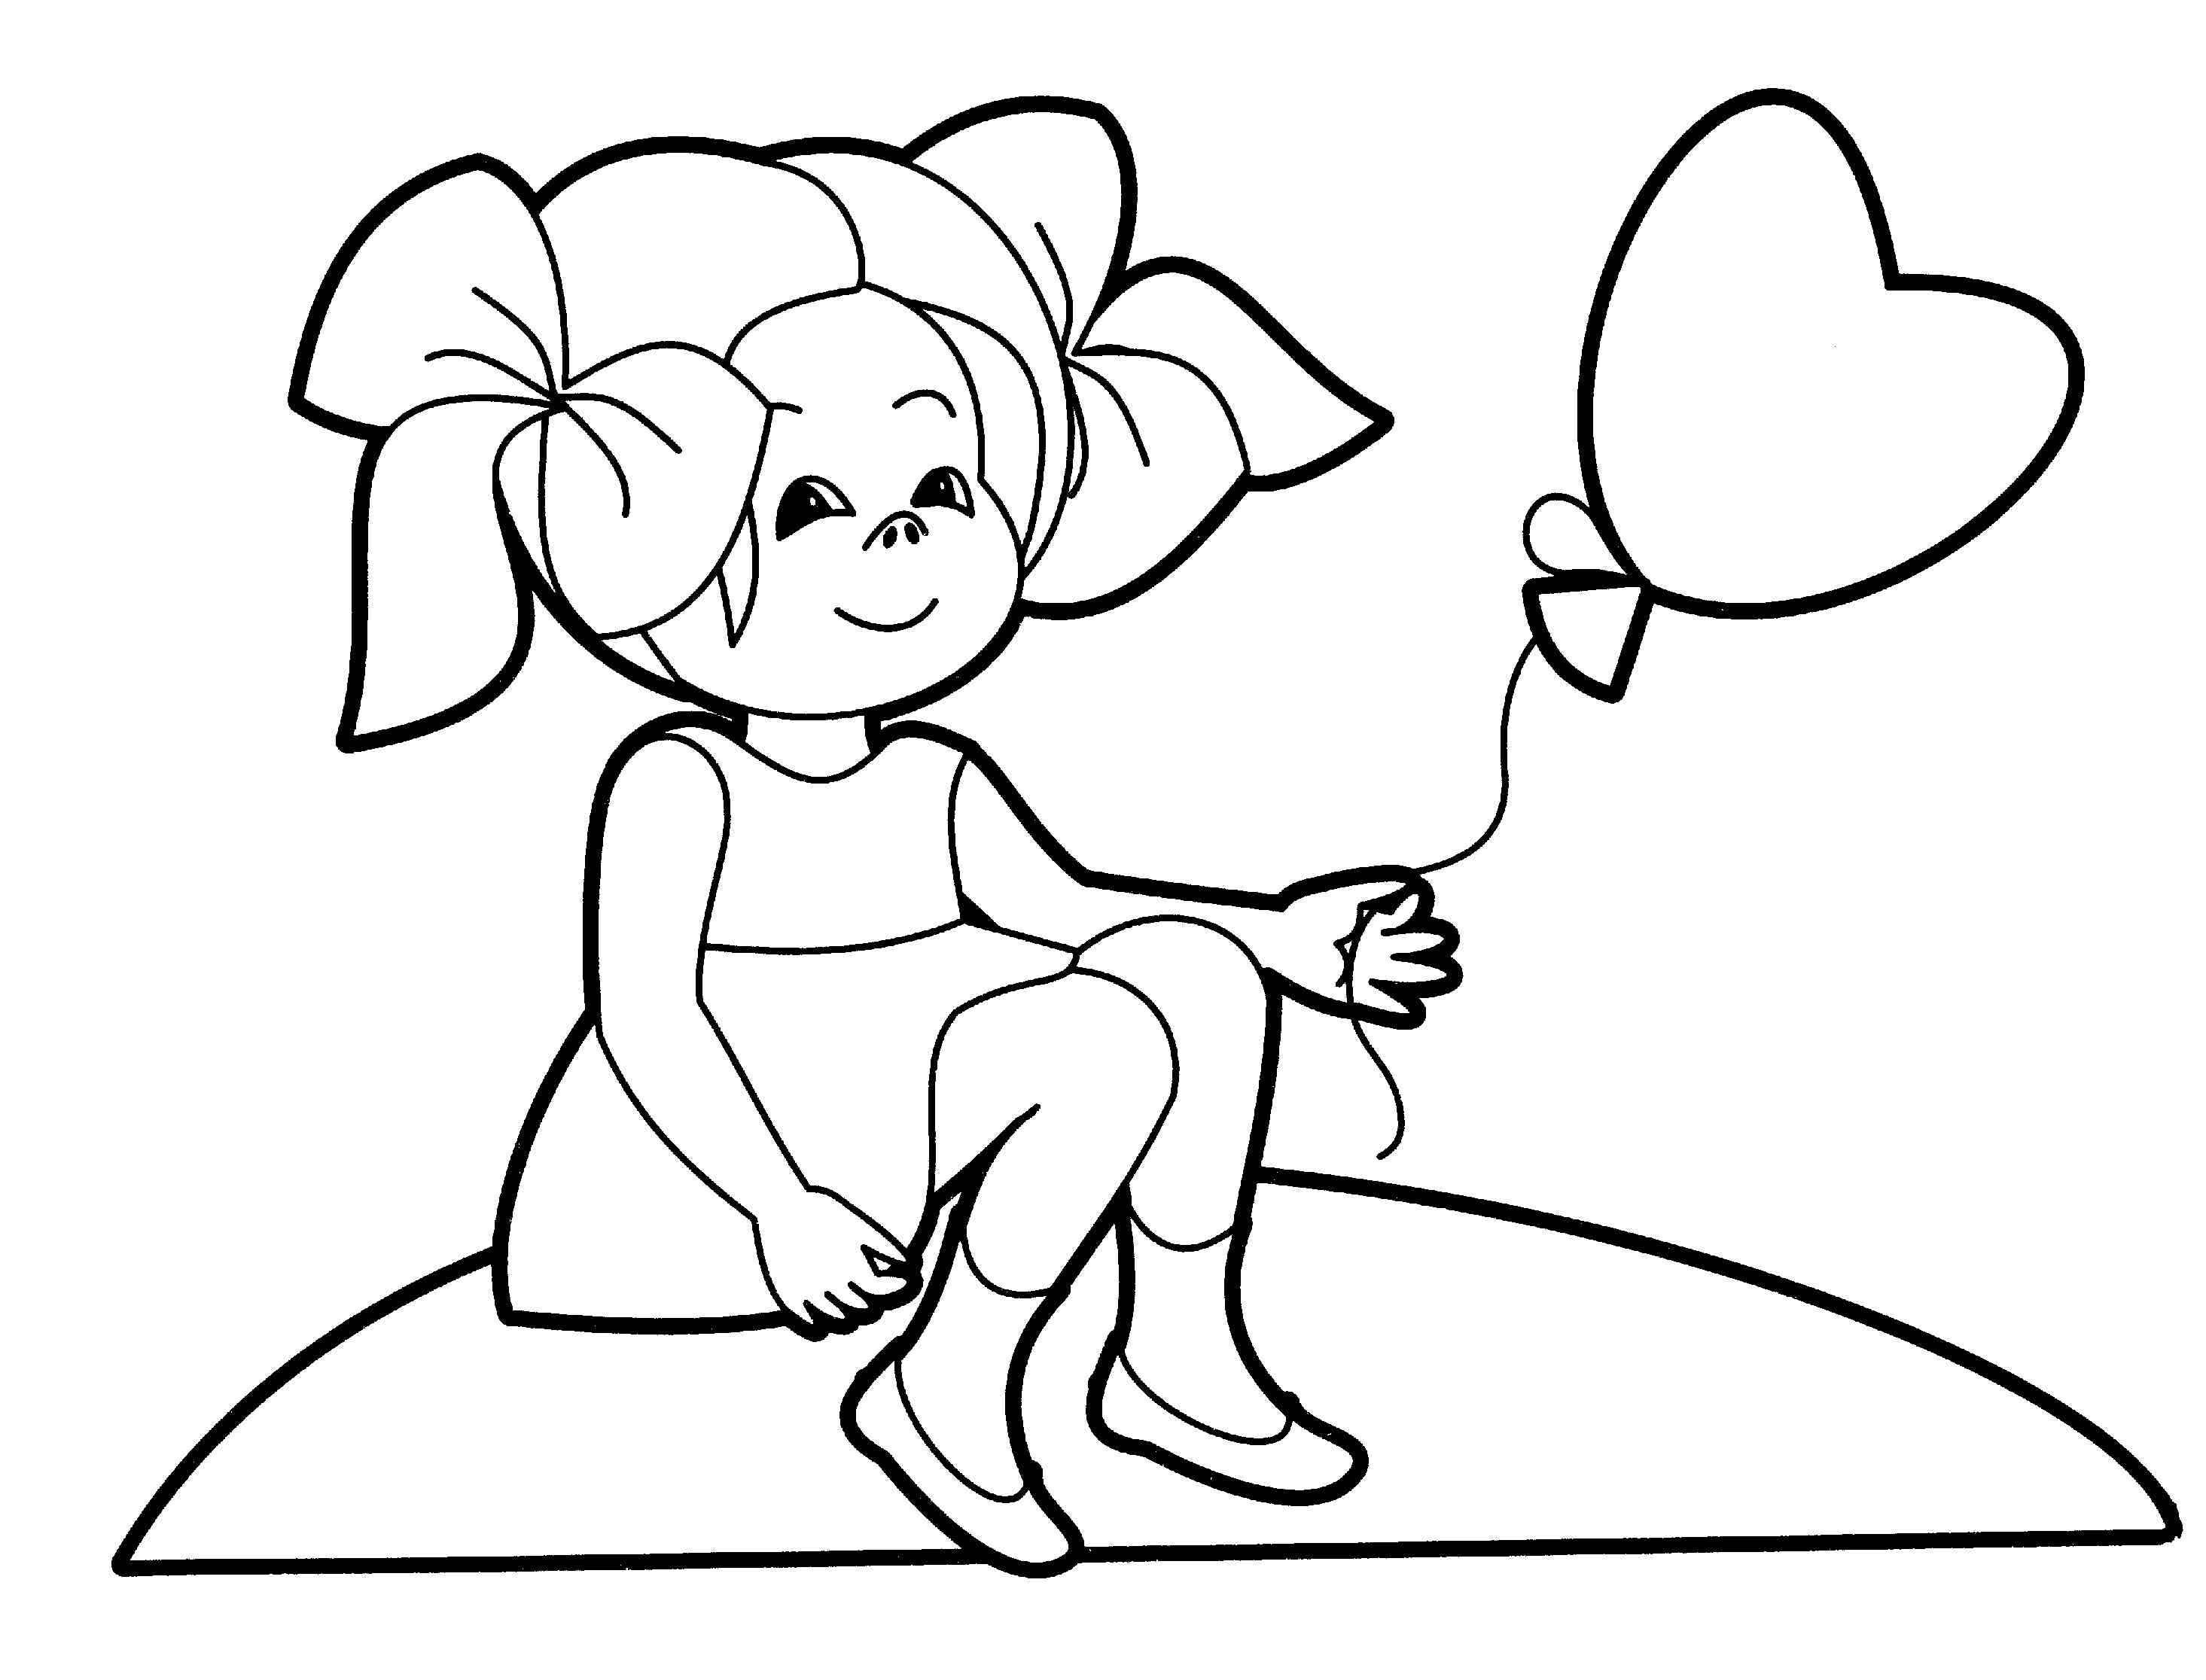 Coloring Pages Of People For Kids - Coloring Home